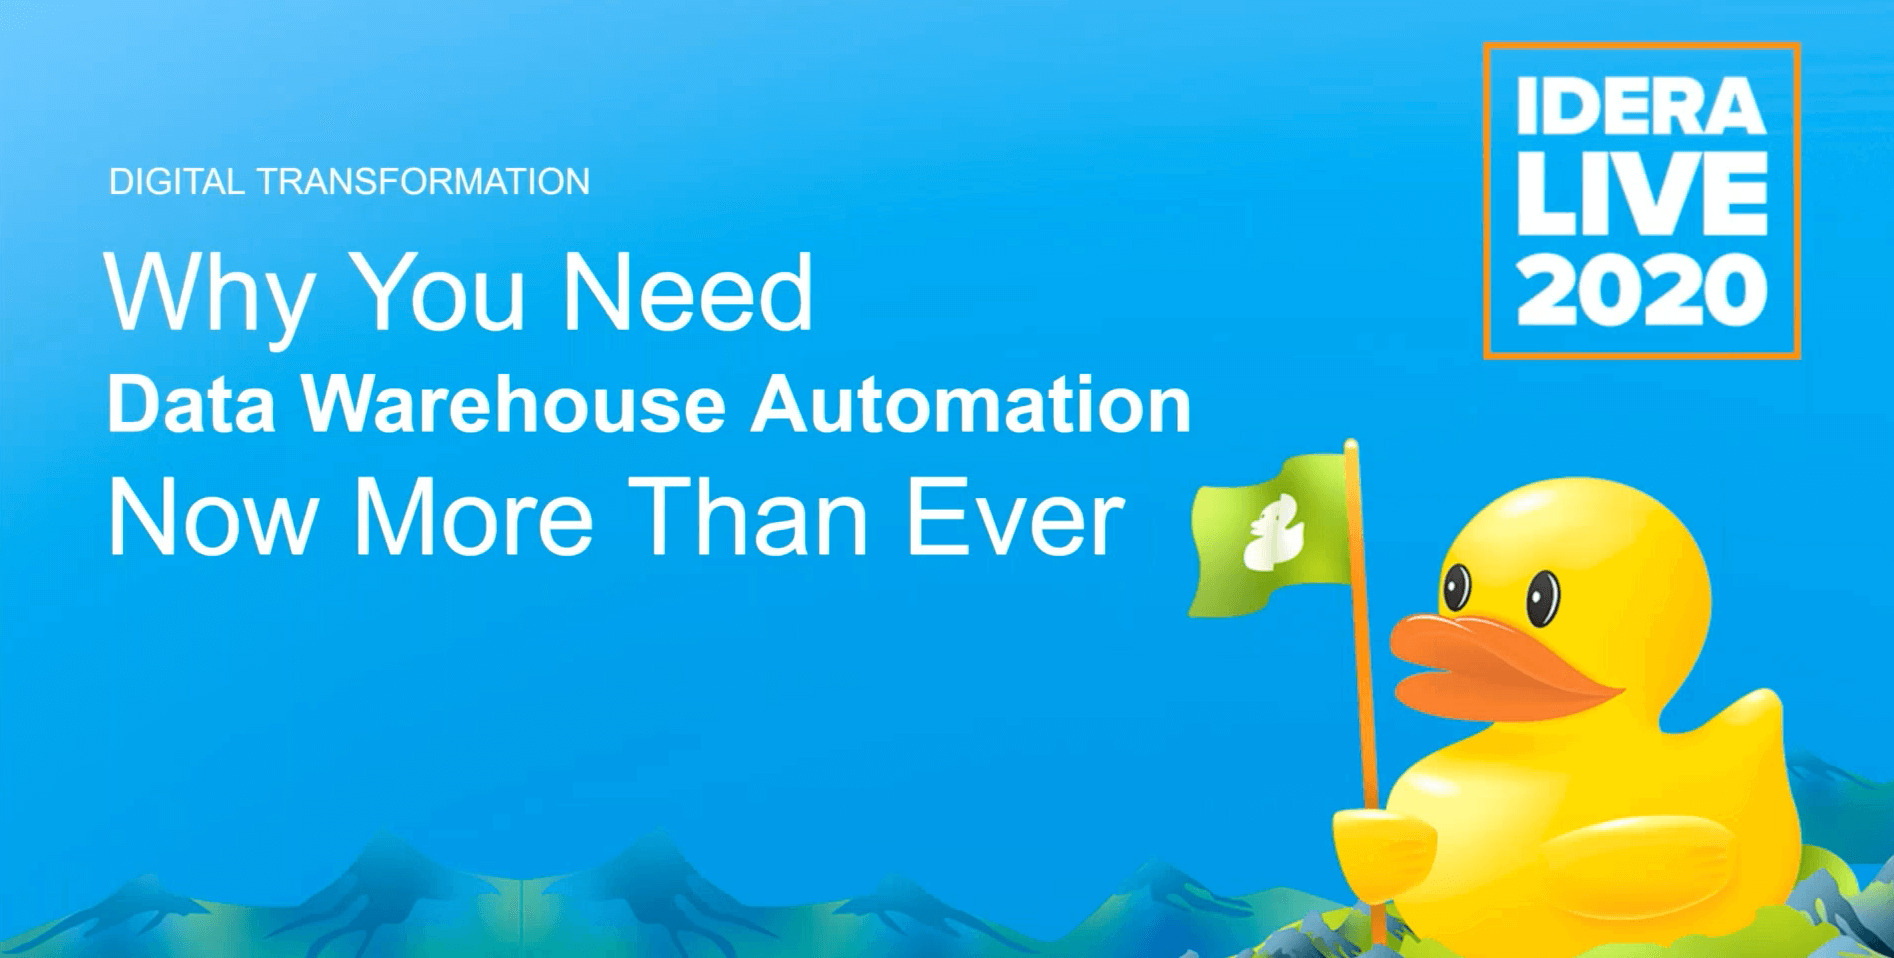 Webcast: Why You Need Data Warehouse Automation Now More Than Ever